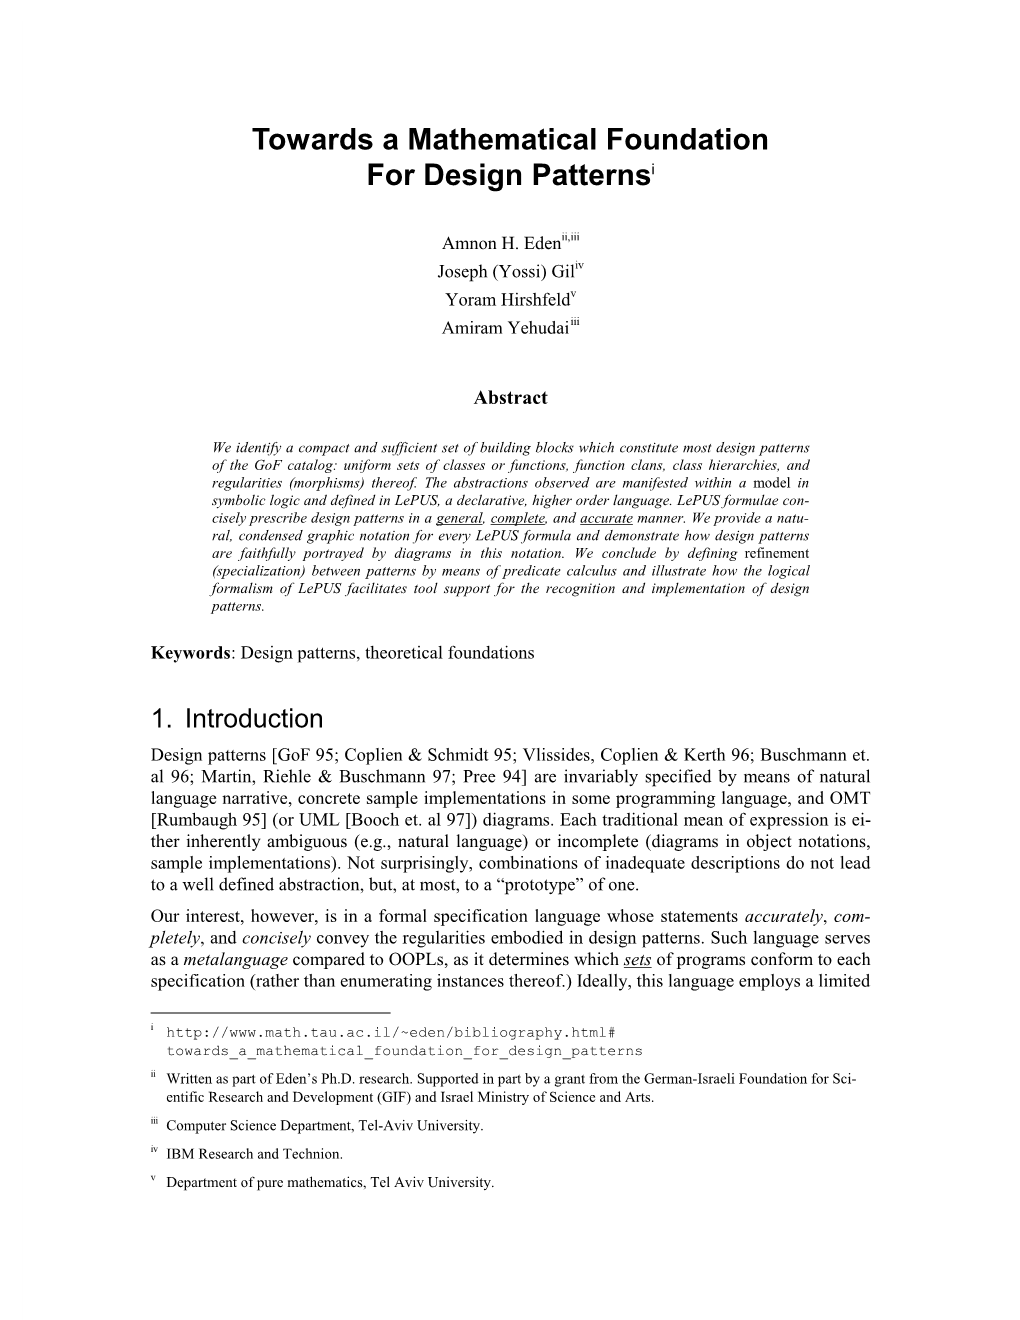 Towards a Mathematical Foundation for Design Patternsi